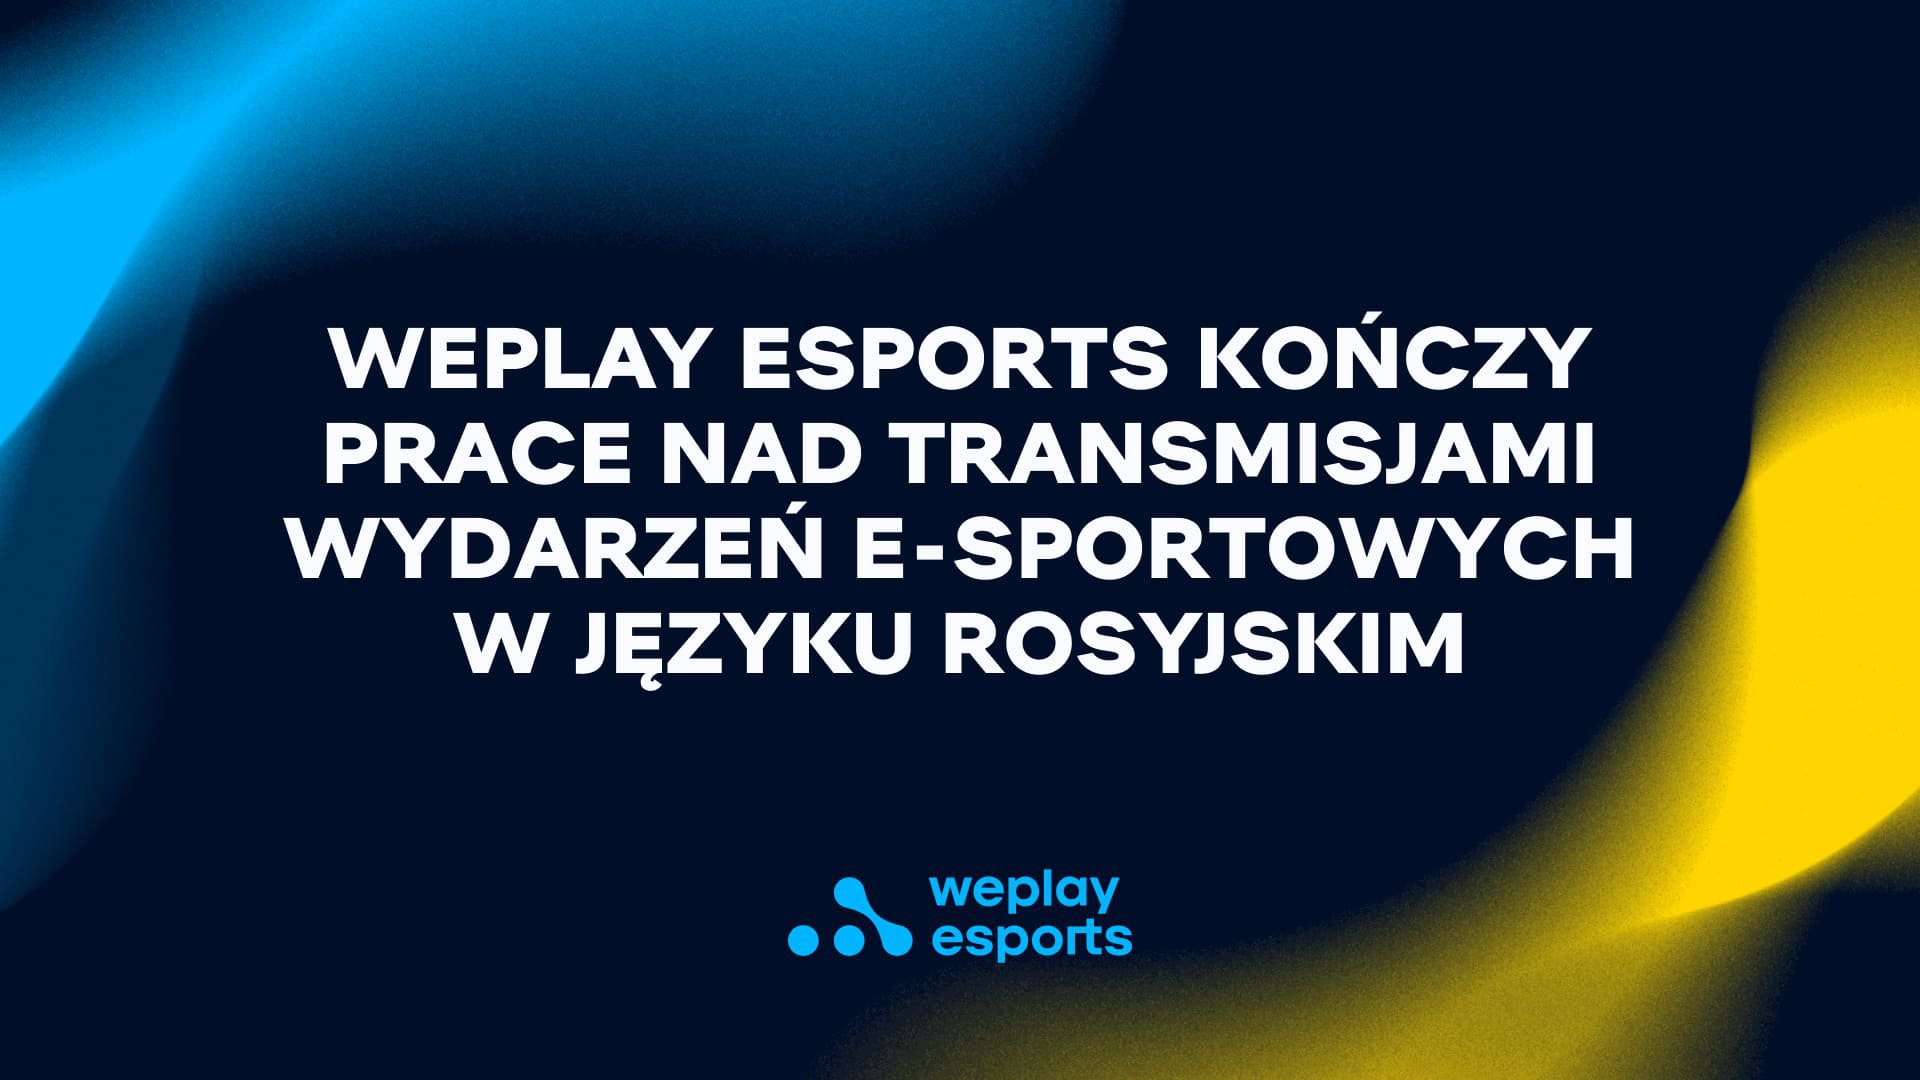 WePlay Esports terminates work on Russian-language broadcasts of esports events. Visual: WePlay Holding